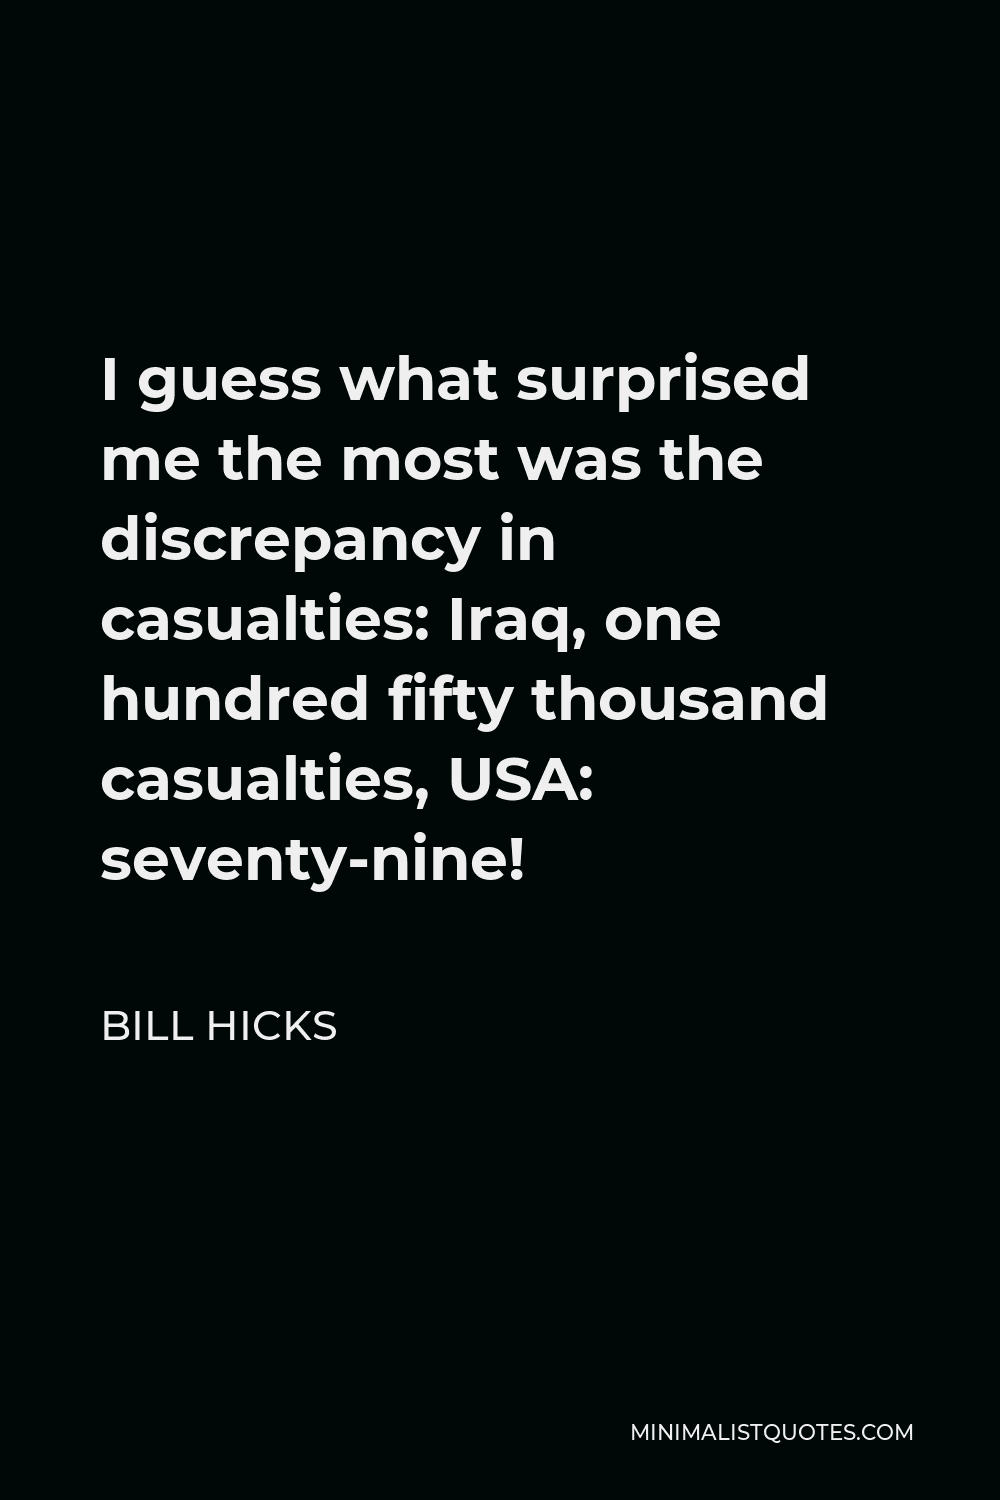 Bill Hicks Quote - I guess what surprised me the most was the discrepancy in casualties: Iraq, one hundred fifty thousand casualties, USA: seventy-nine!